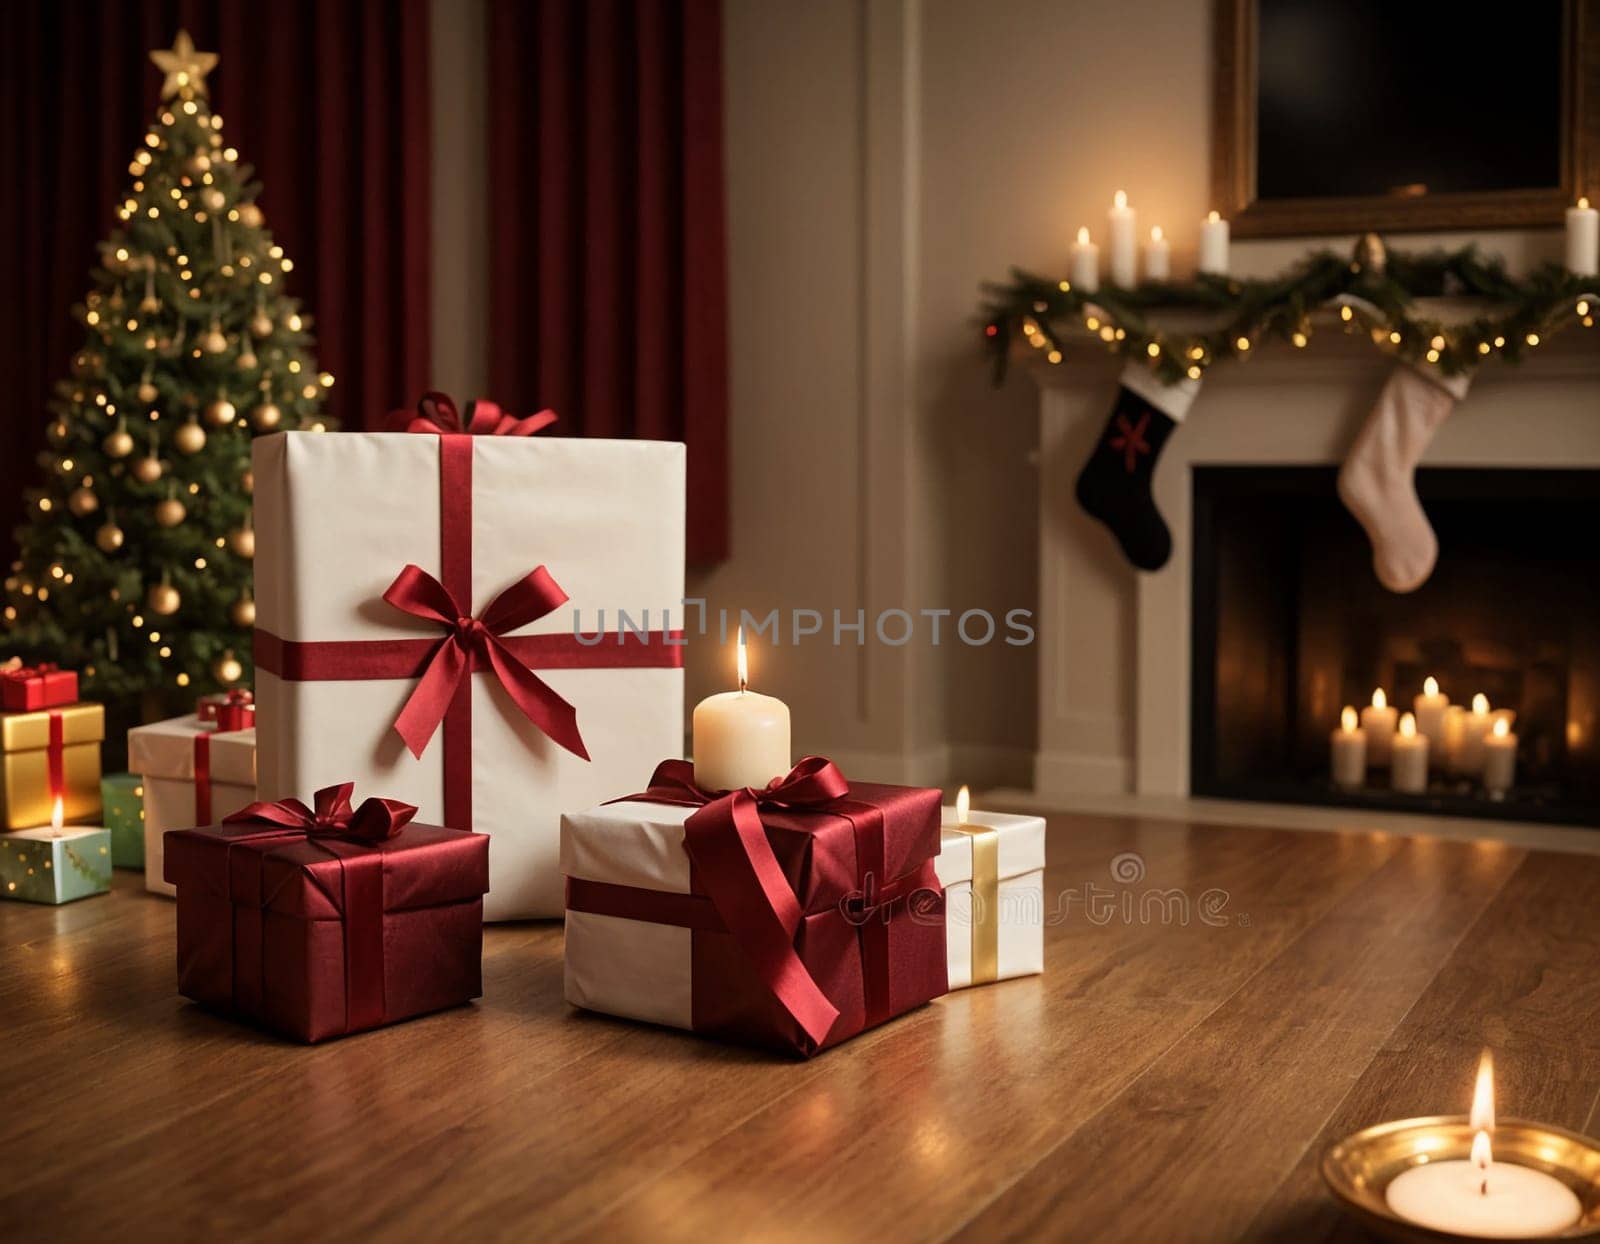 Lovely Christmas background with gifts and decorations by NeuroSky